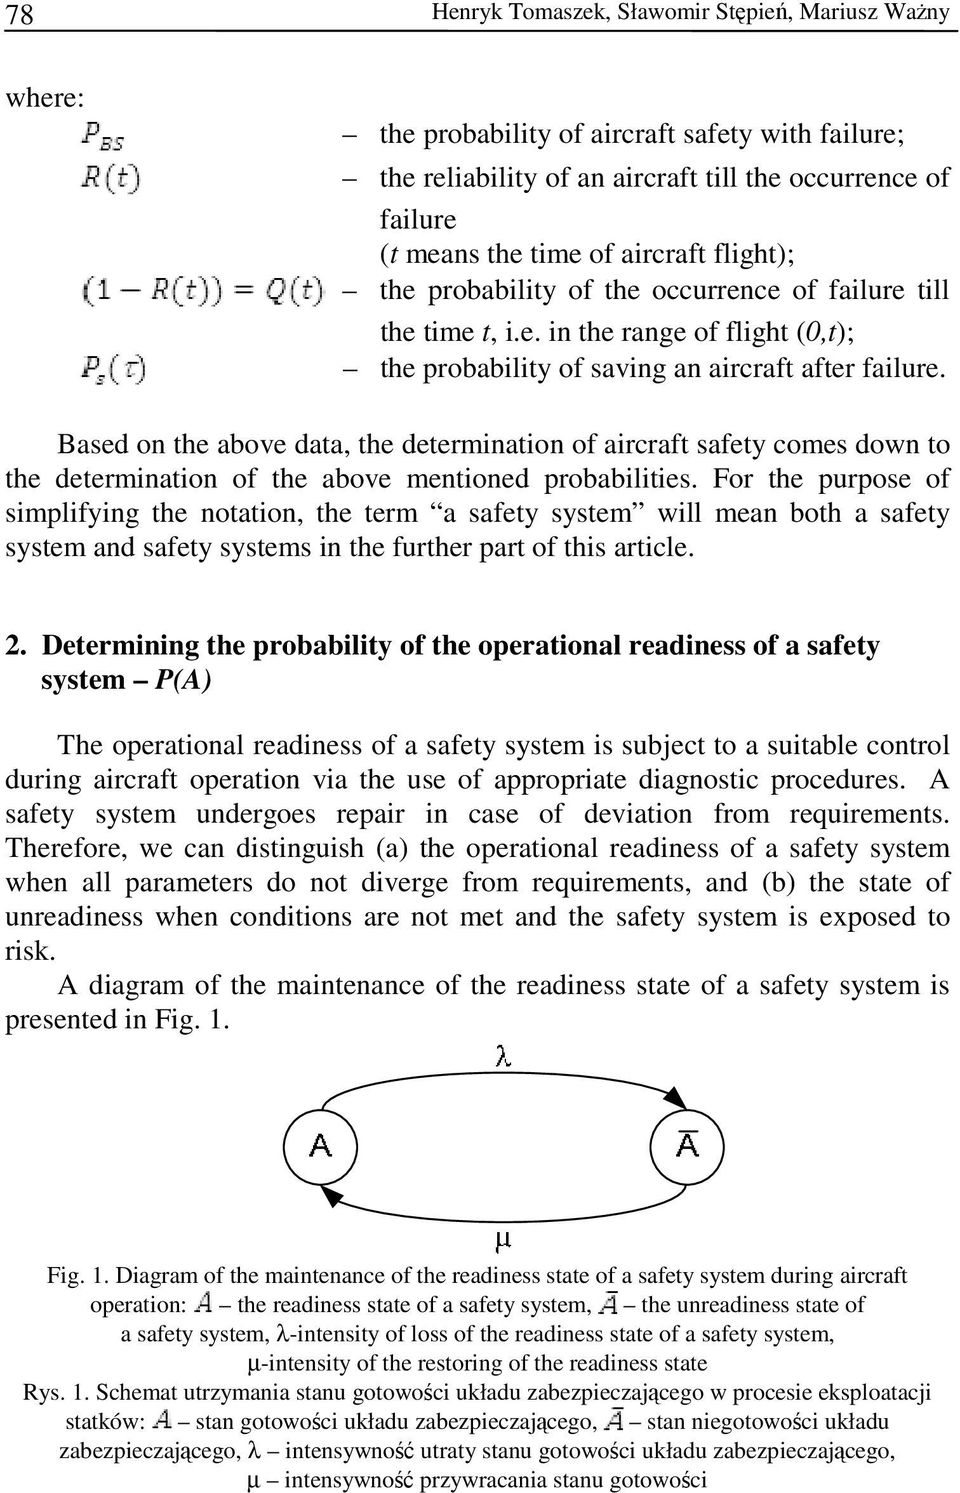 Based on the above data, the determination of aircraft safety comes down to the determination of the above mentioned probabilities.